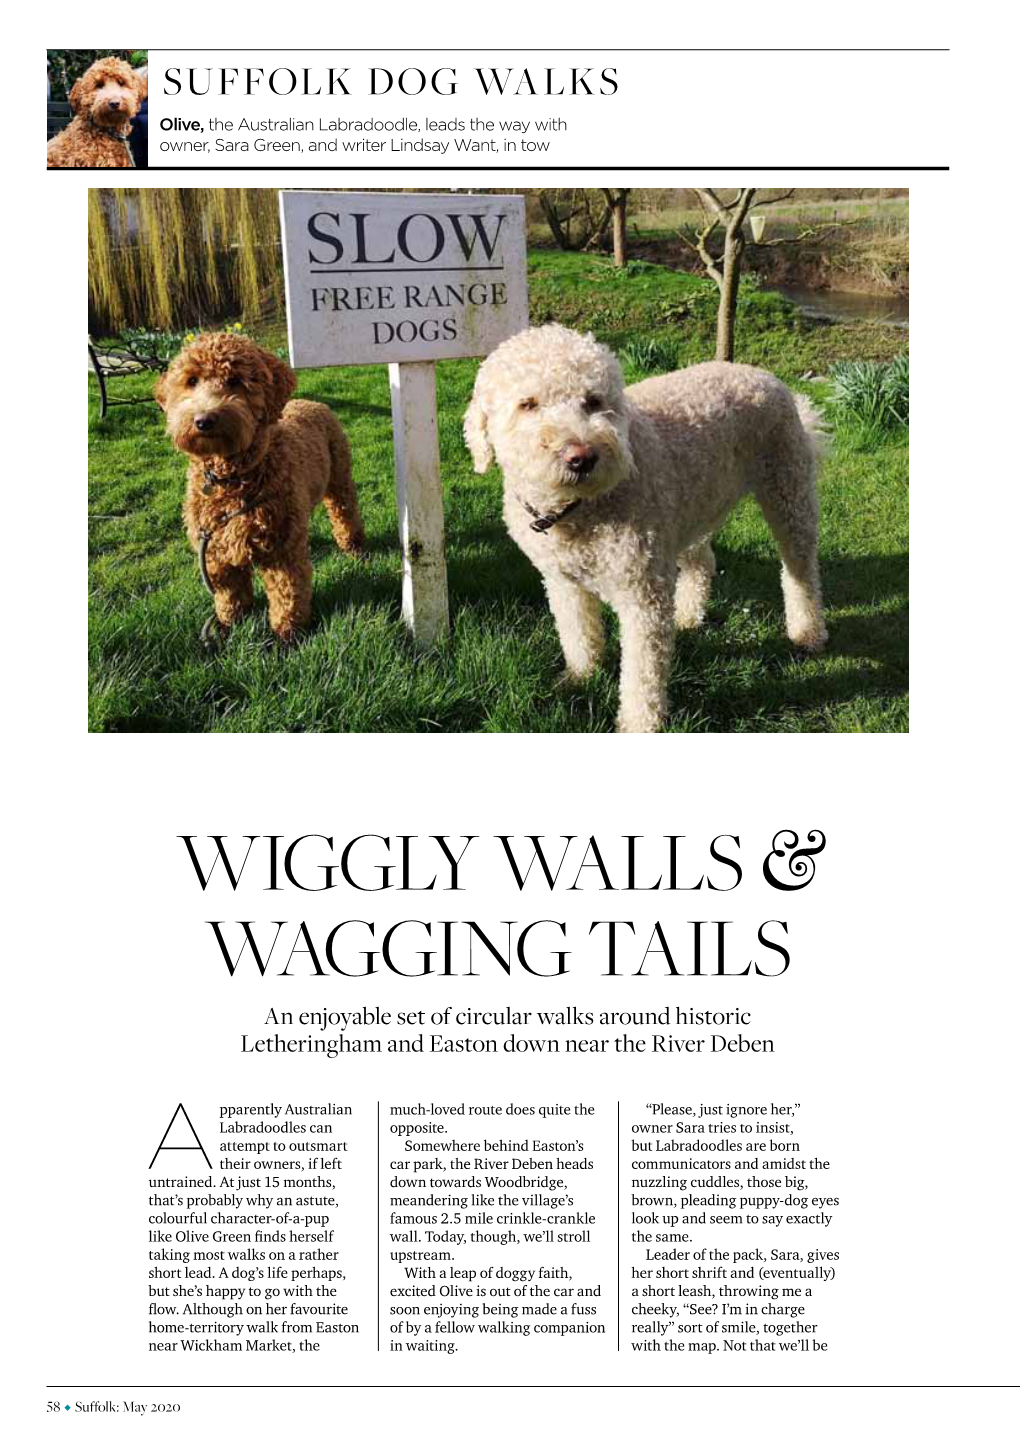 Wiggly Walls & Wagging Tails